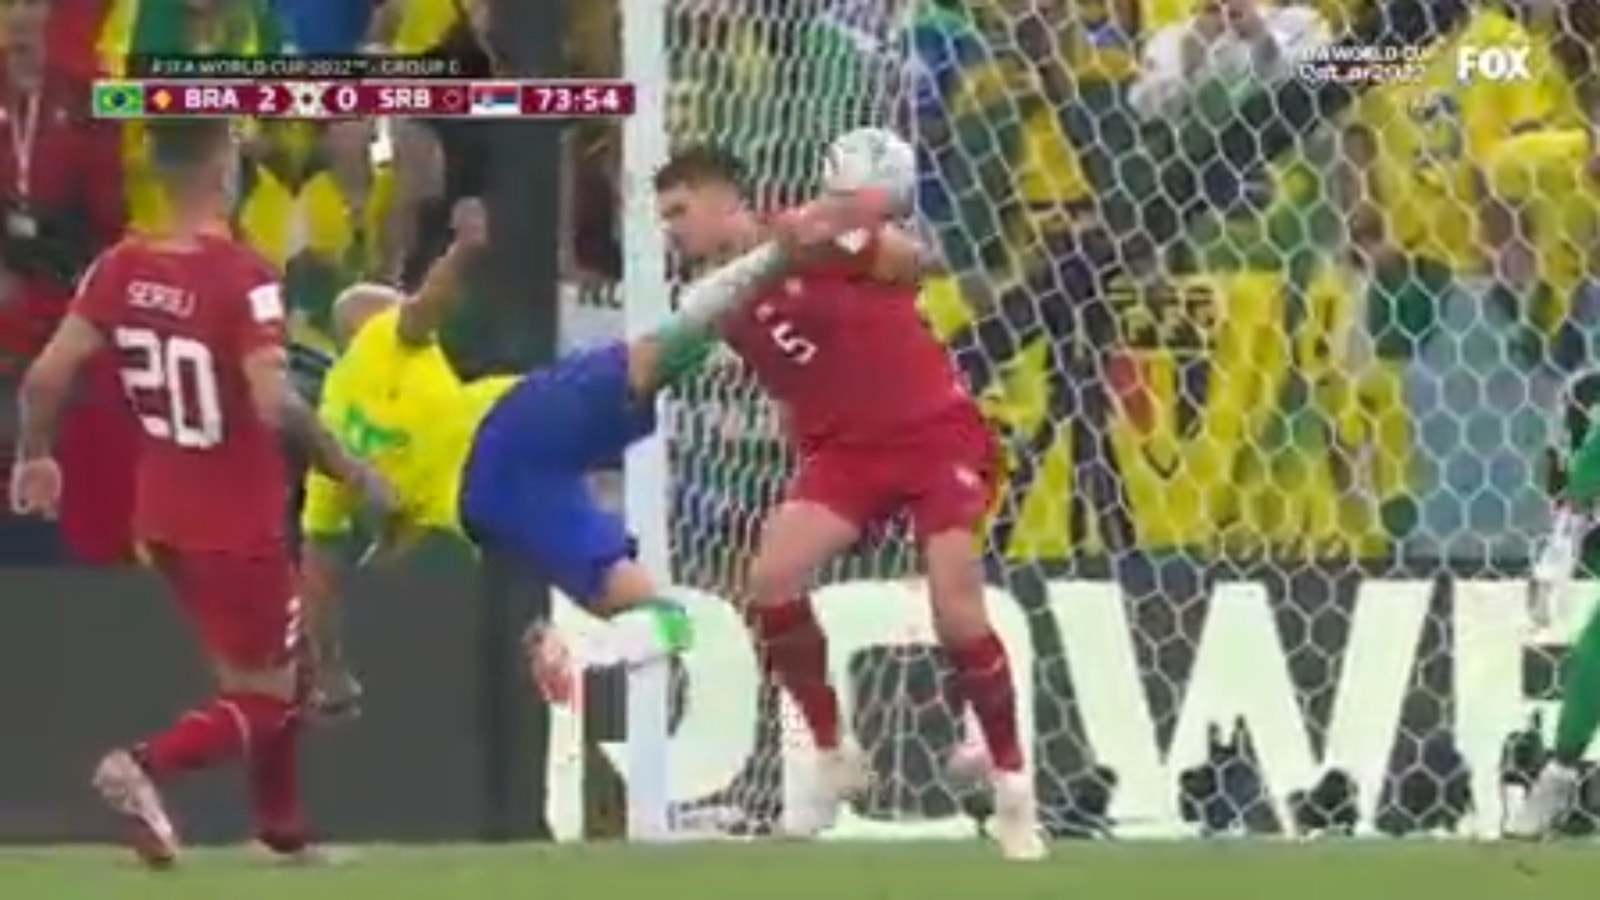 Richarlison gives Brazil a 2-0 lead with an acrobatic goal in 73'